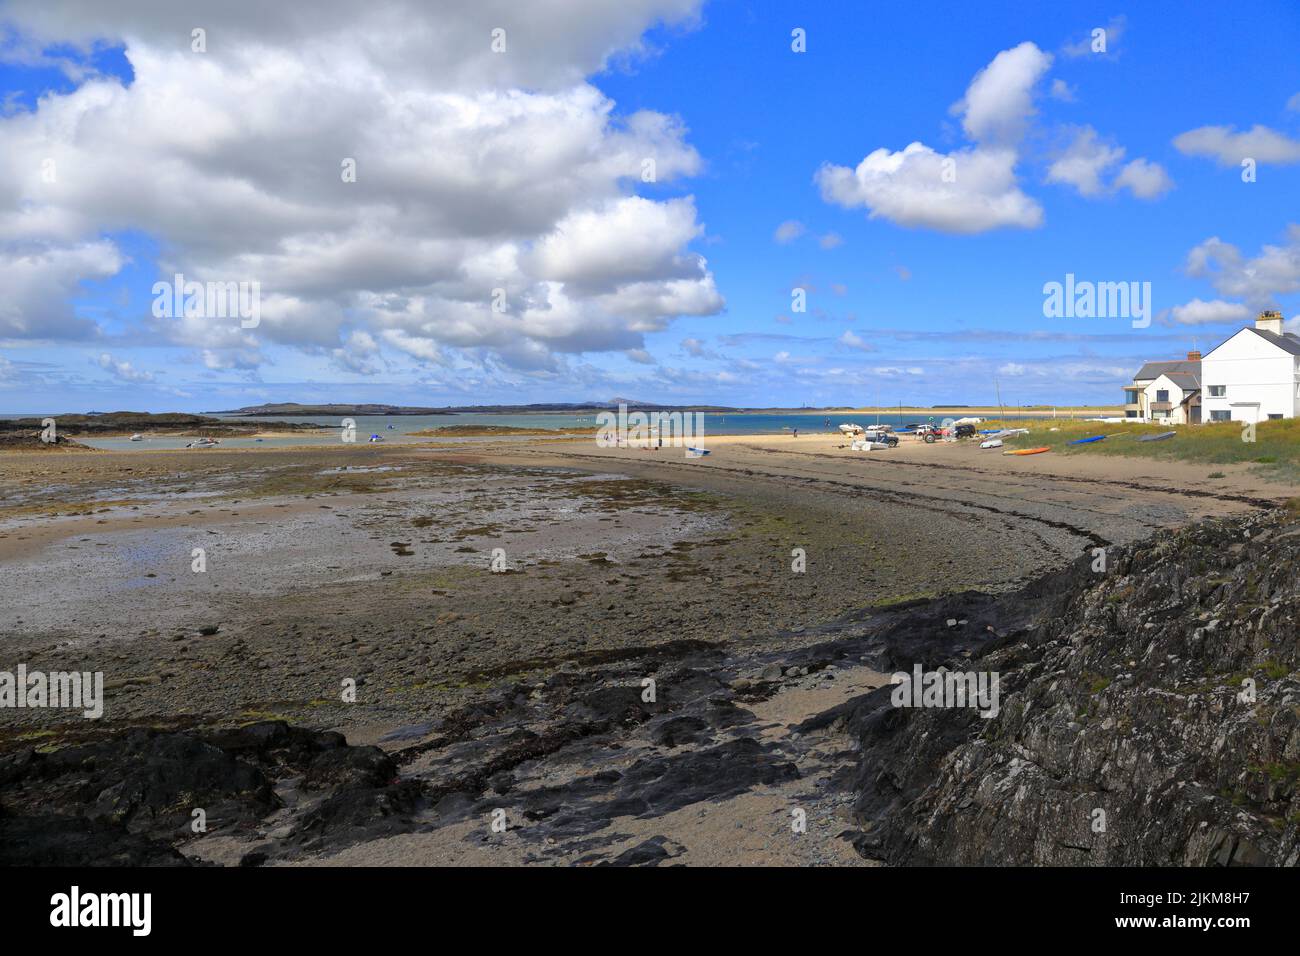 Rhosneigr beach, Isle of Anglesey, Ynys Mon, North Wales, UK. Stock Photo